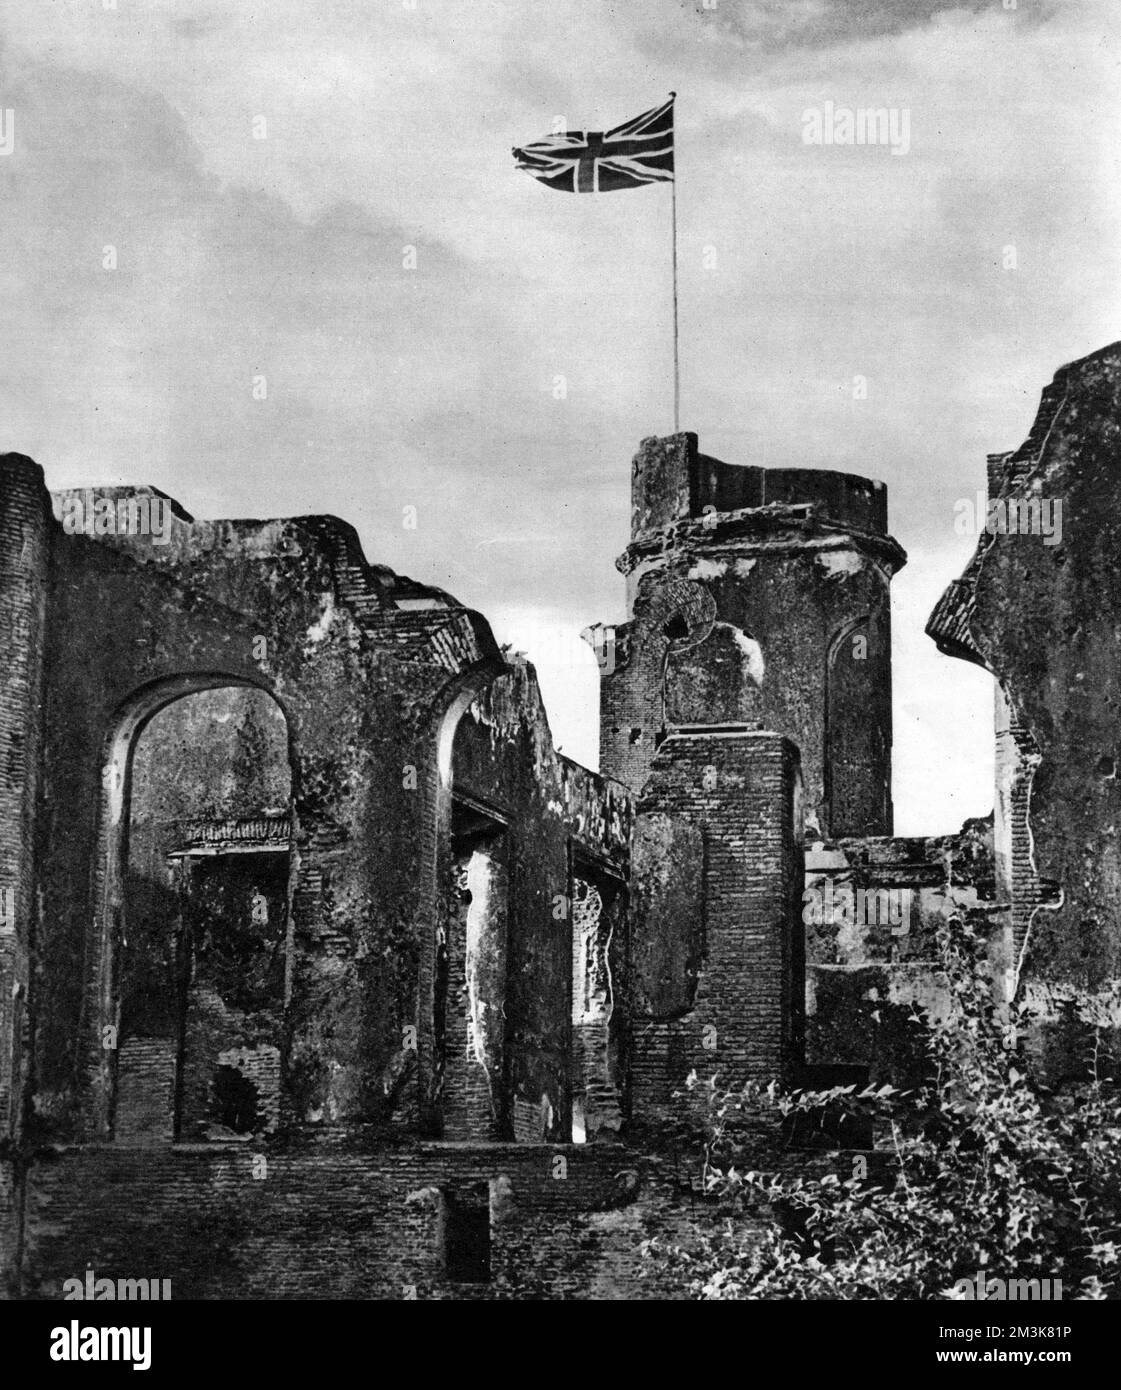 On 15 August, 1947, British India ended and the two new Dominions of India and Pakistan came into being under Independence.  New flags were raised at the new capitals, Delhi and Karachi respectively.  On this day the flag over the ruins of Lucknow Residency was lowered for the first and last time, since 1858 - the year in which direct British rule in India replaced that of the British East India Company following the Indian Mutiny, or Sepoy Rebellion, of 1857-1858.     Date: 23/08/1947 Stock Photo